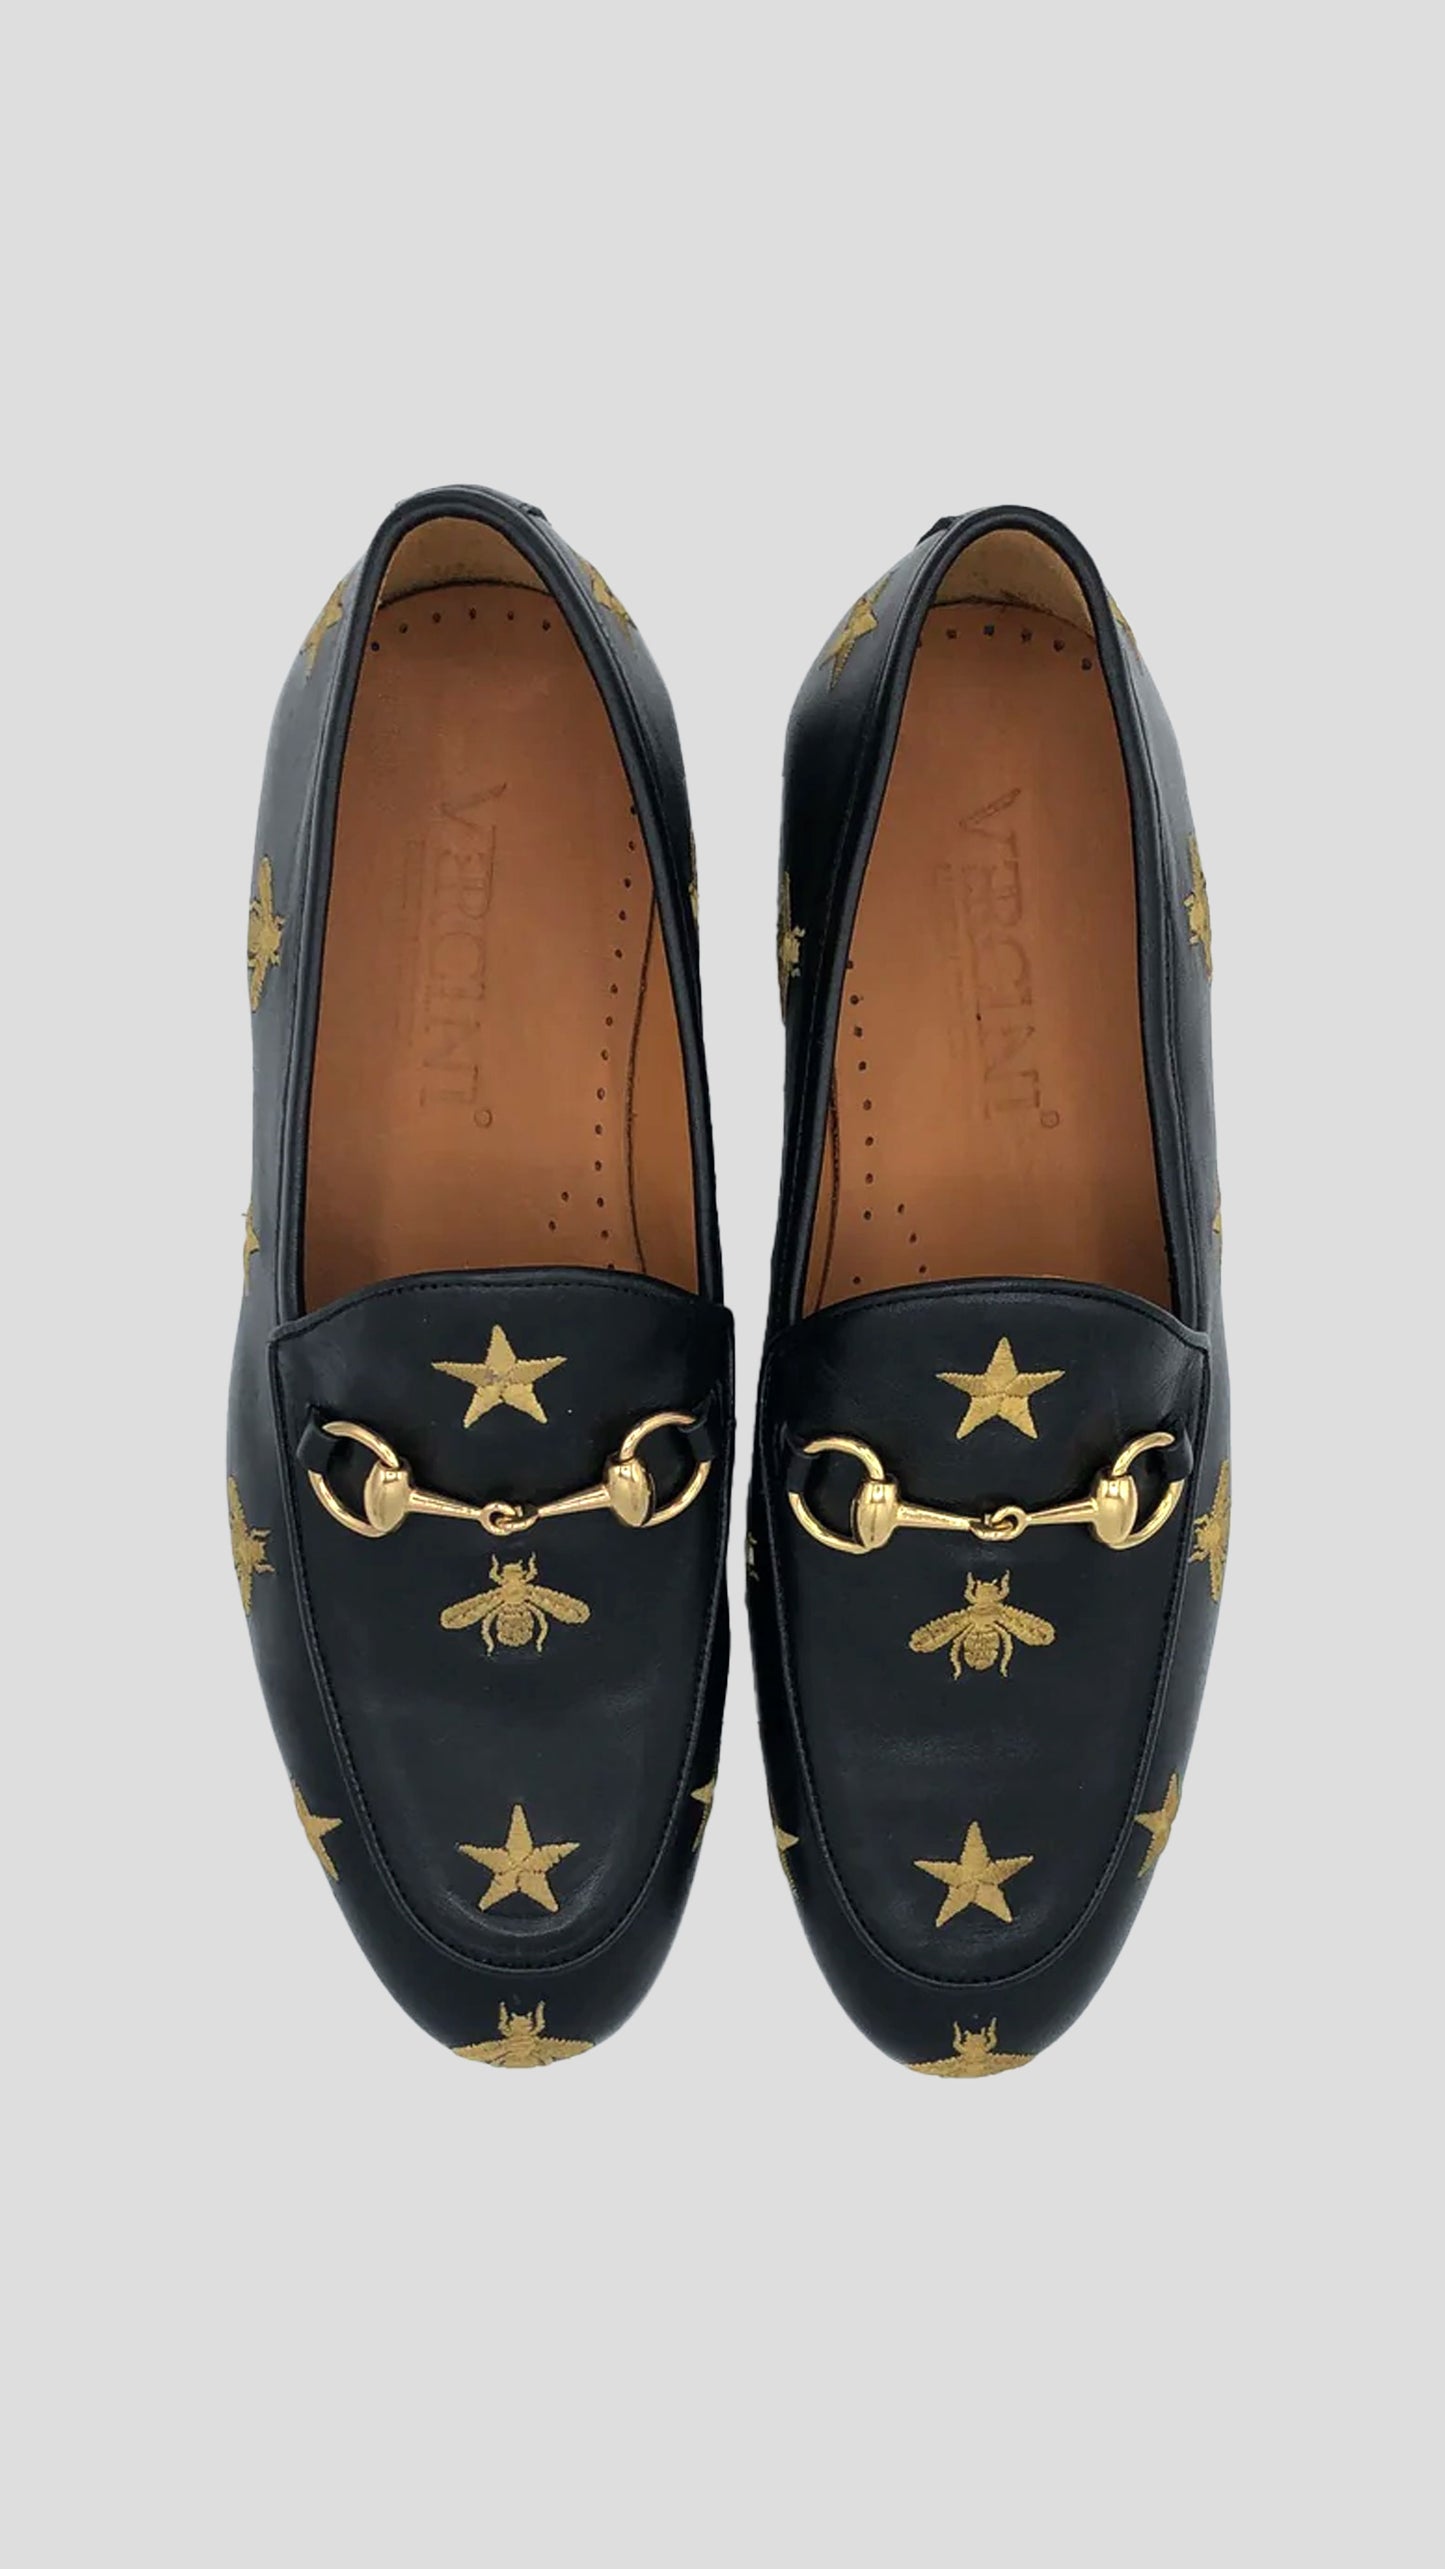 Men's Luxury Embroidered Loafers by Vercini LOAFERS Ph inventory shoes Vercini